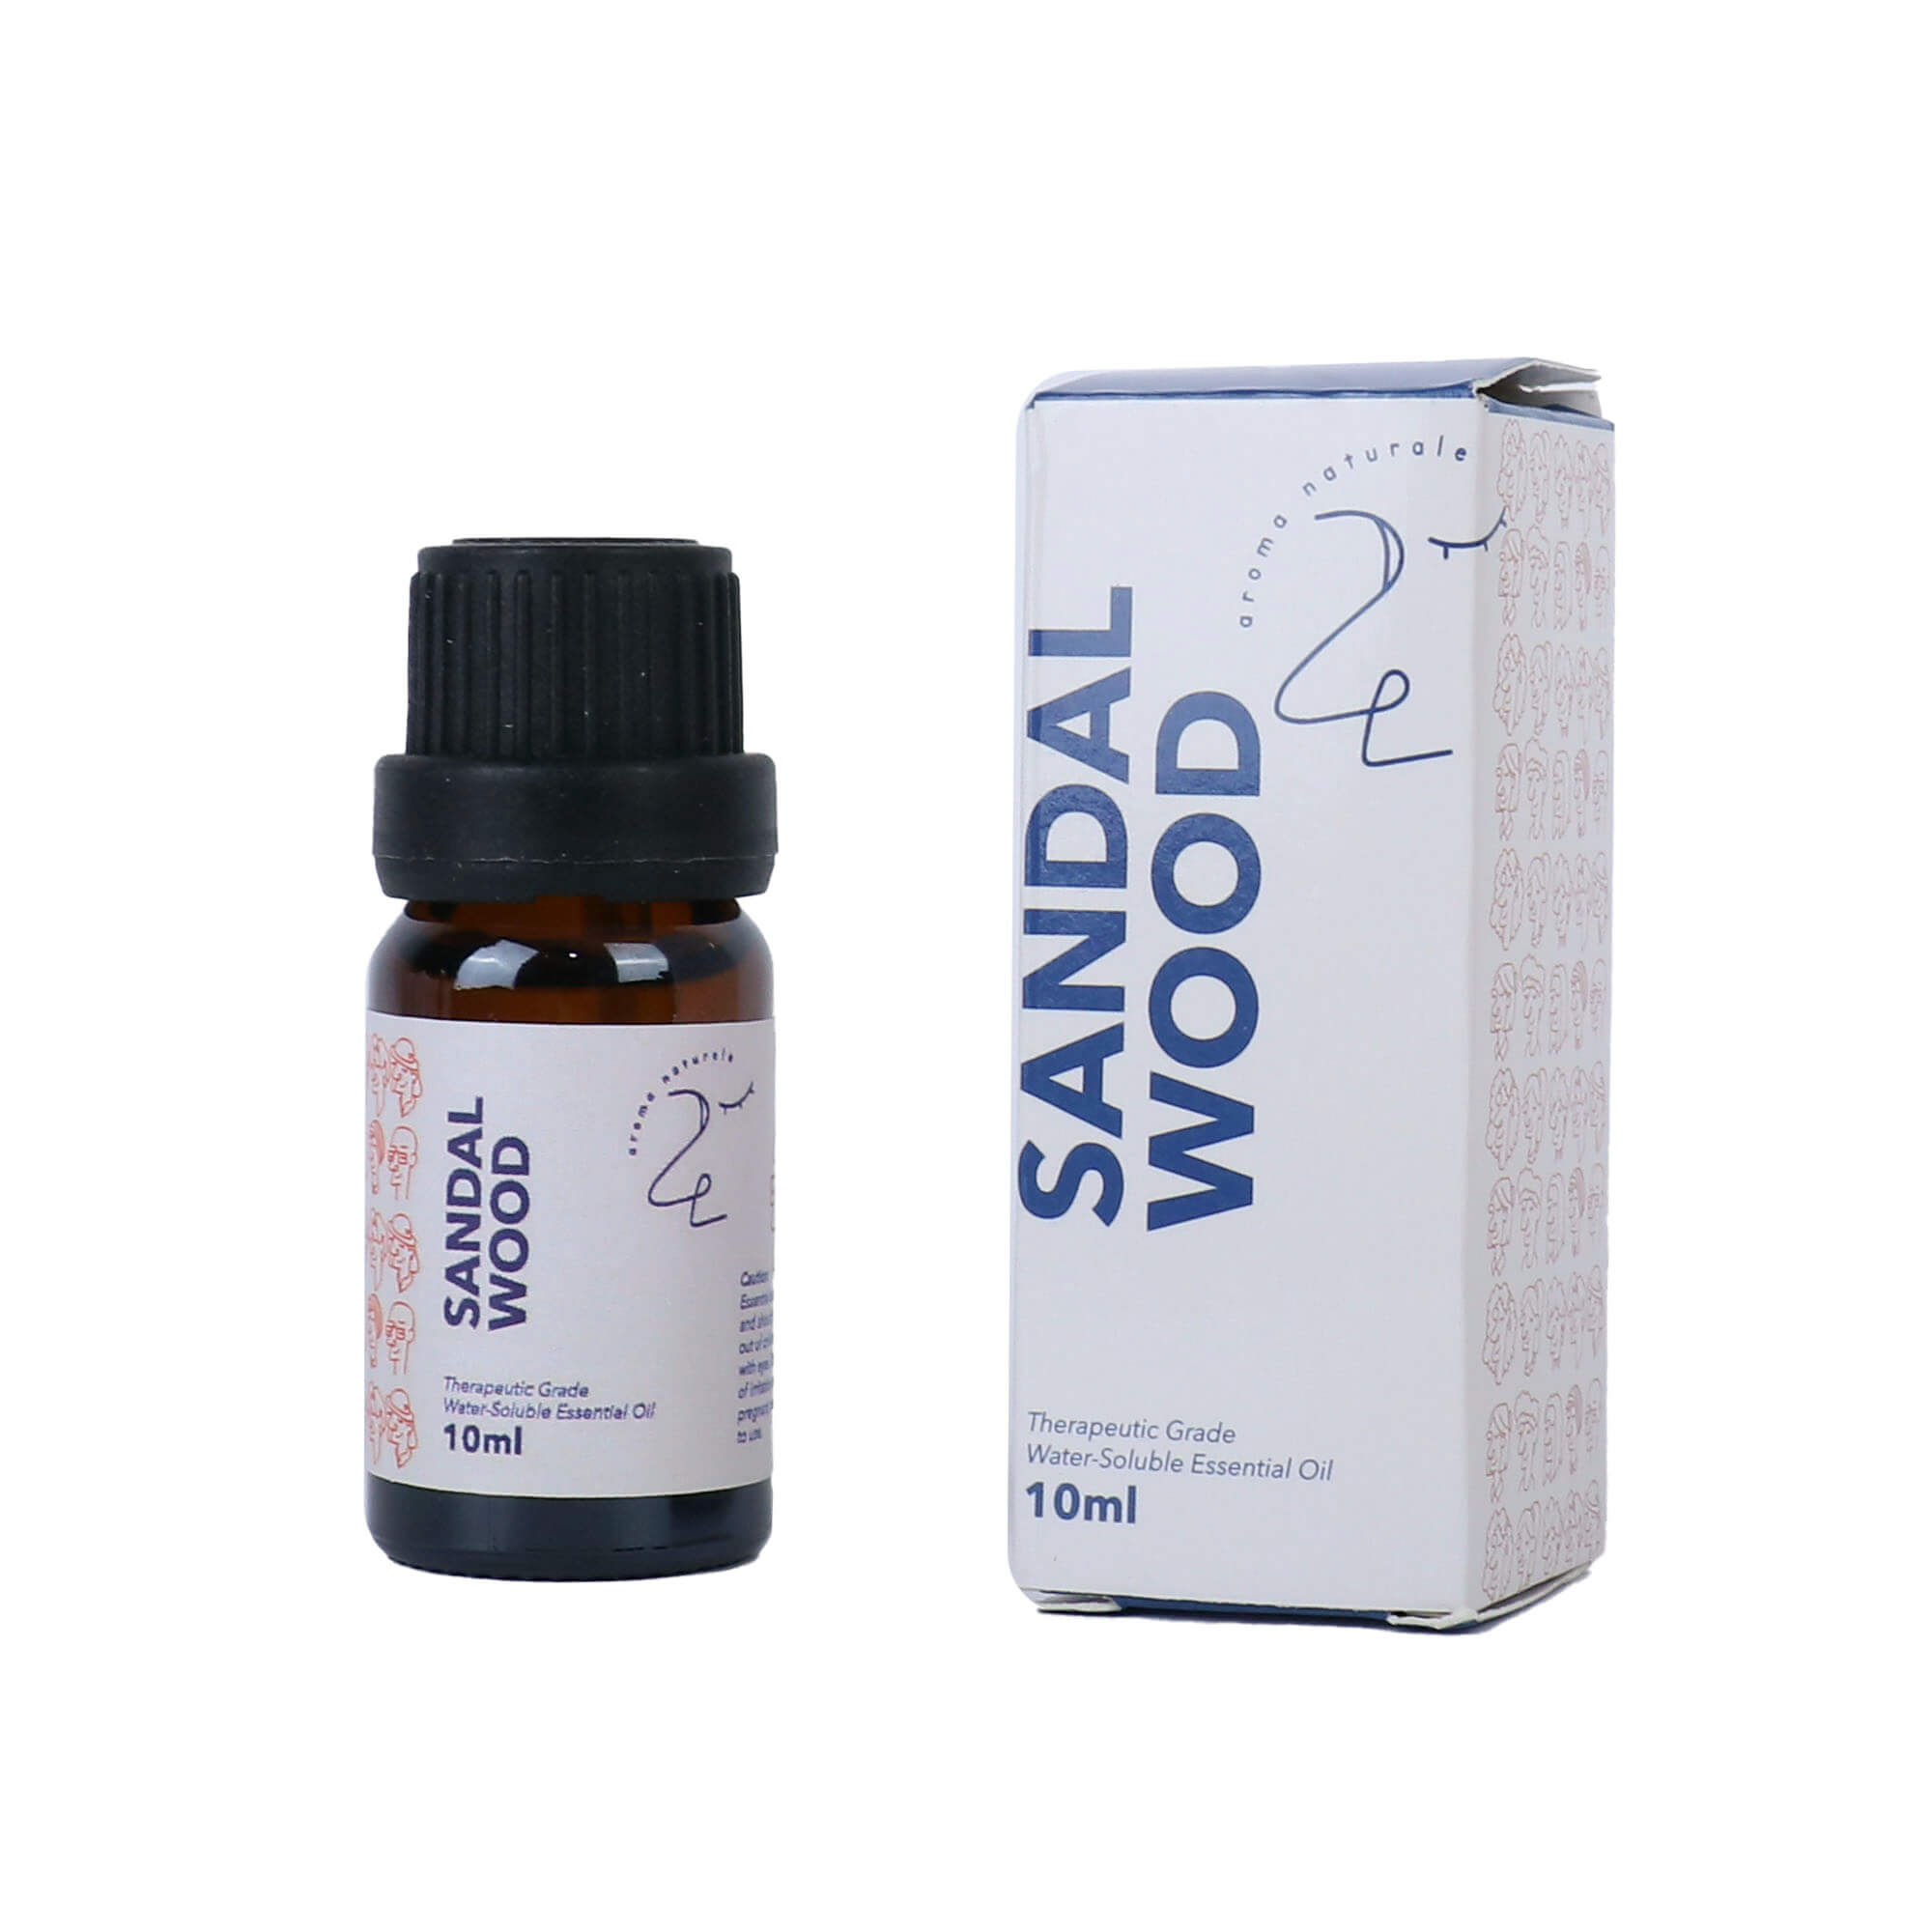 AROMA NATURALE 10ml Water-Soluble Essential Oil